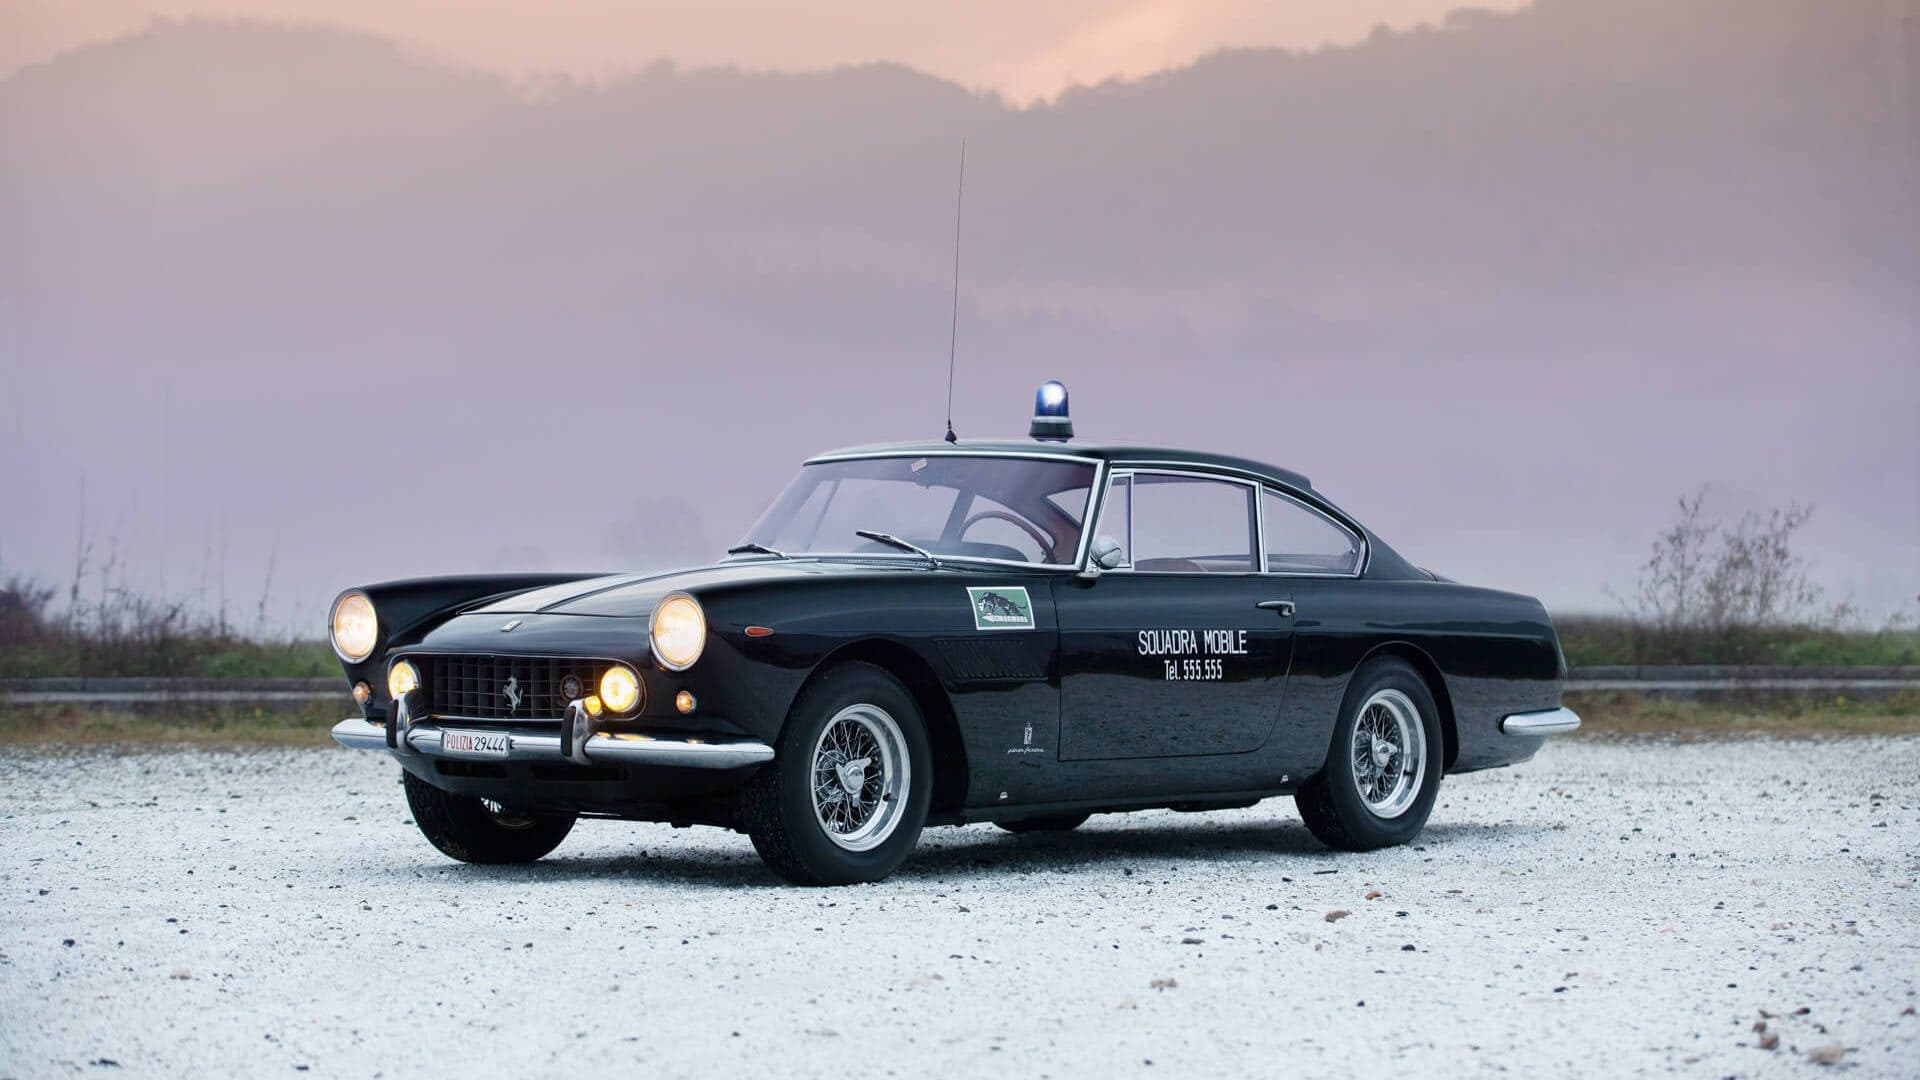 This For-Sale 1962 Ferrari 250 GTE Police Car Has Legal Sirens and an Epic Backstory